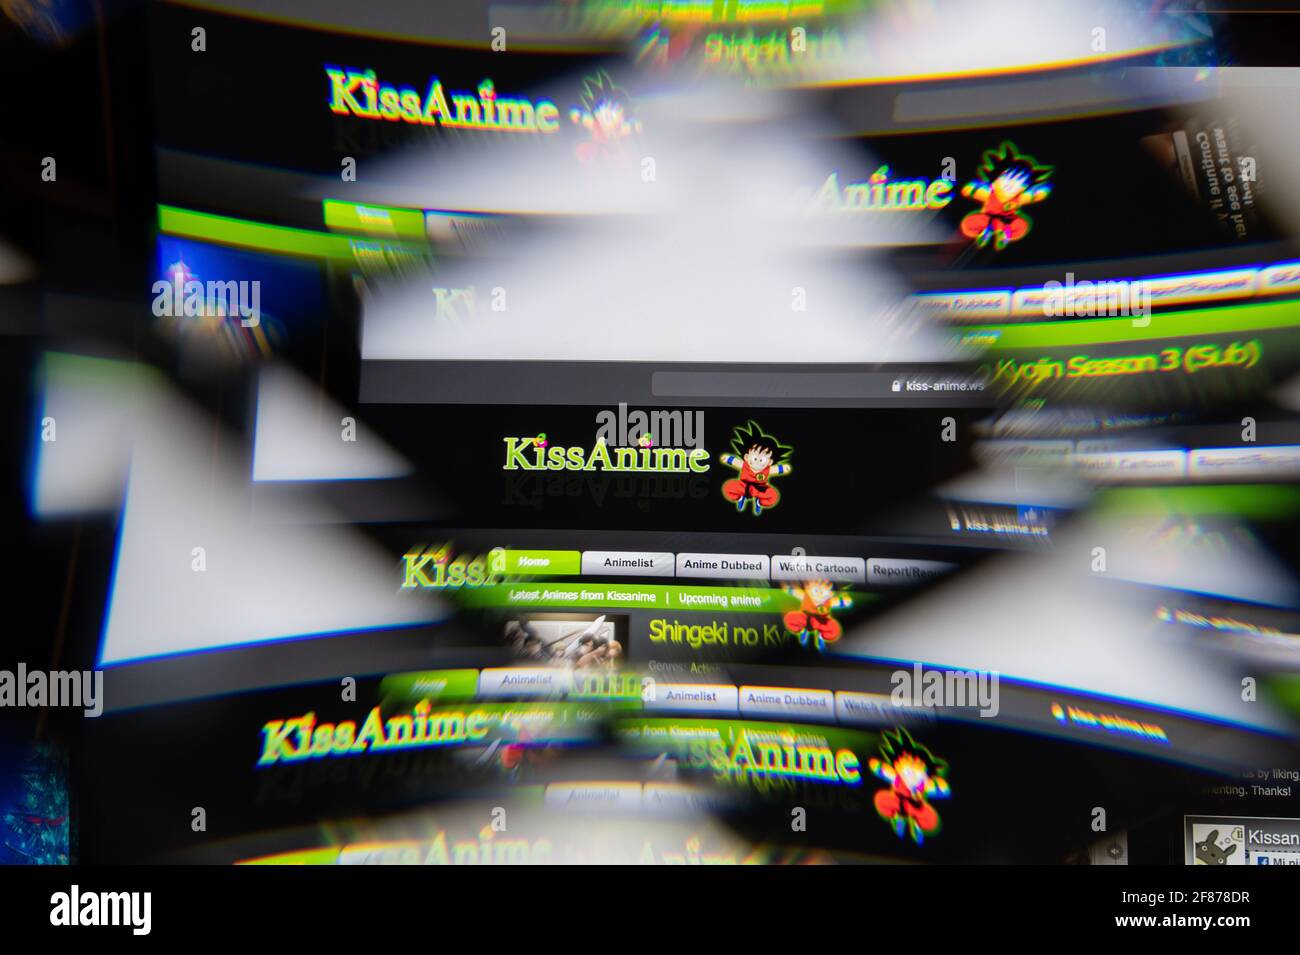 Anime Senpai  Exclusive 𝗪𝗘 𝗔𝗥𝗘 𝗕𝗔𝗖𝗞 𝗜𝘁𝘀 𝗔 𝗣𝗿𝗮𝗻𝗸  one of the KissAnime clones announced on their website KissAnime clone  websites have existed for years but never got many visitors but